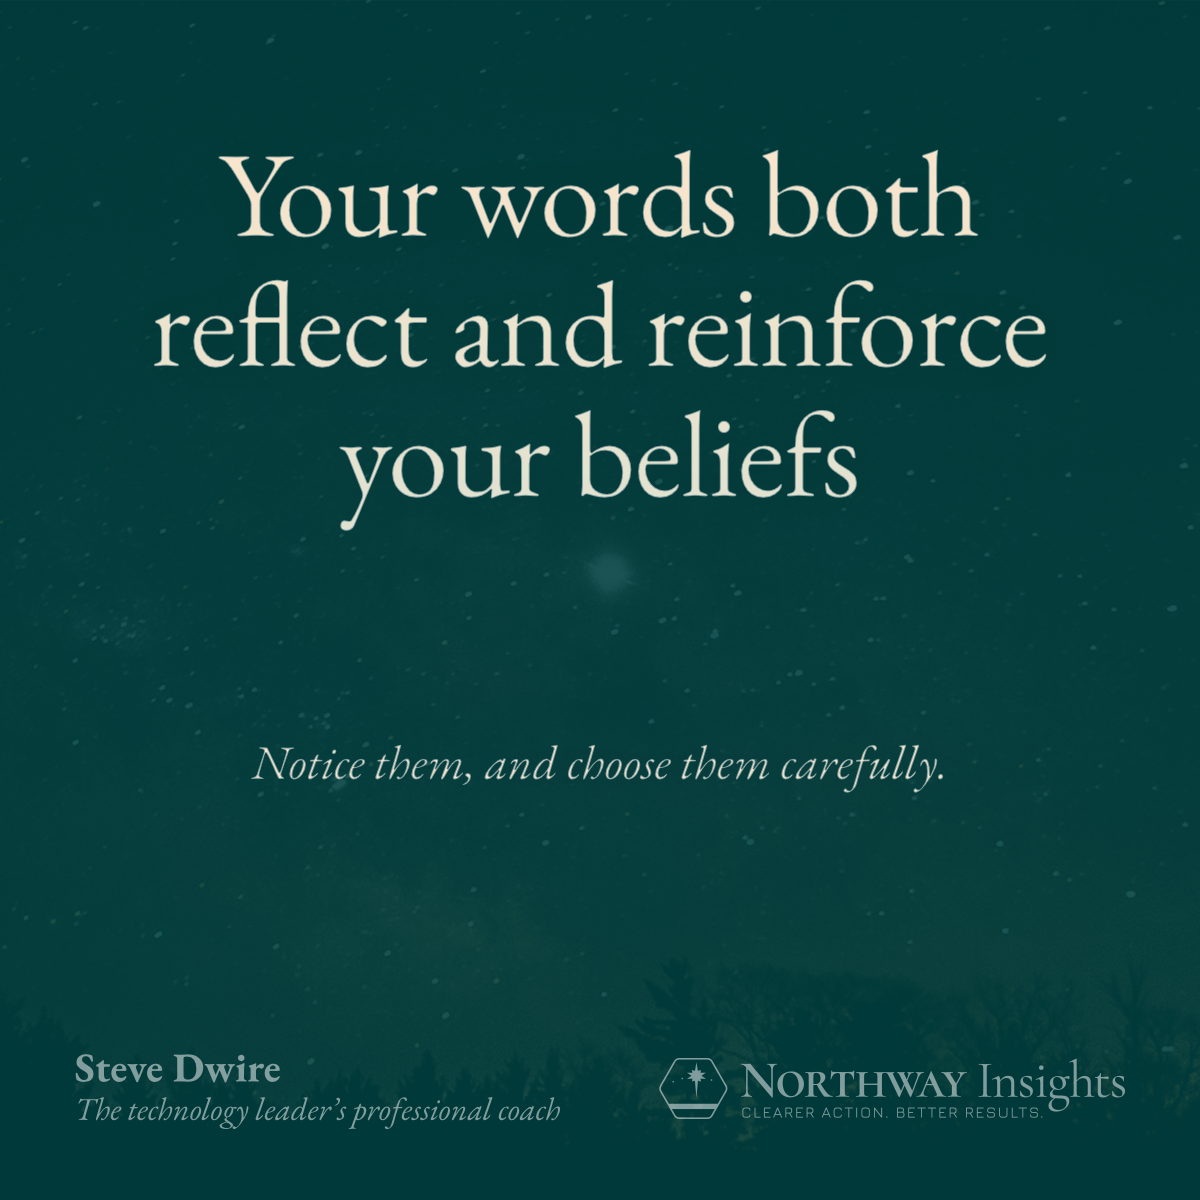 Your words both reflect and reinforce your beliefs